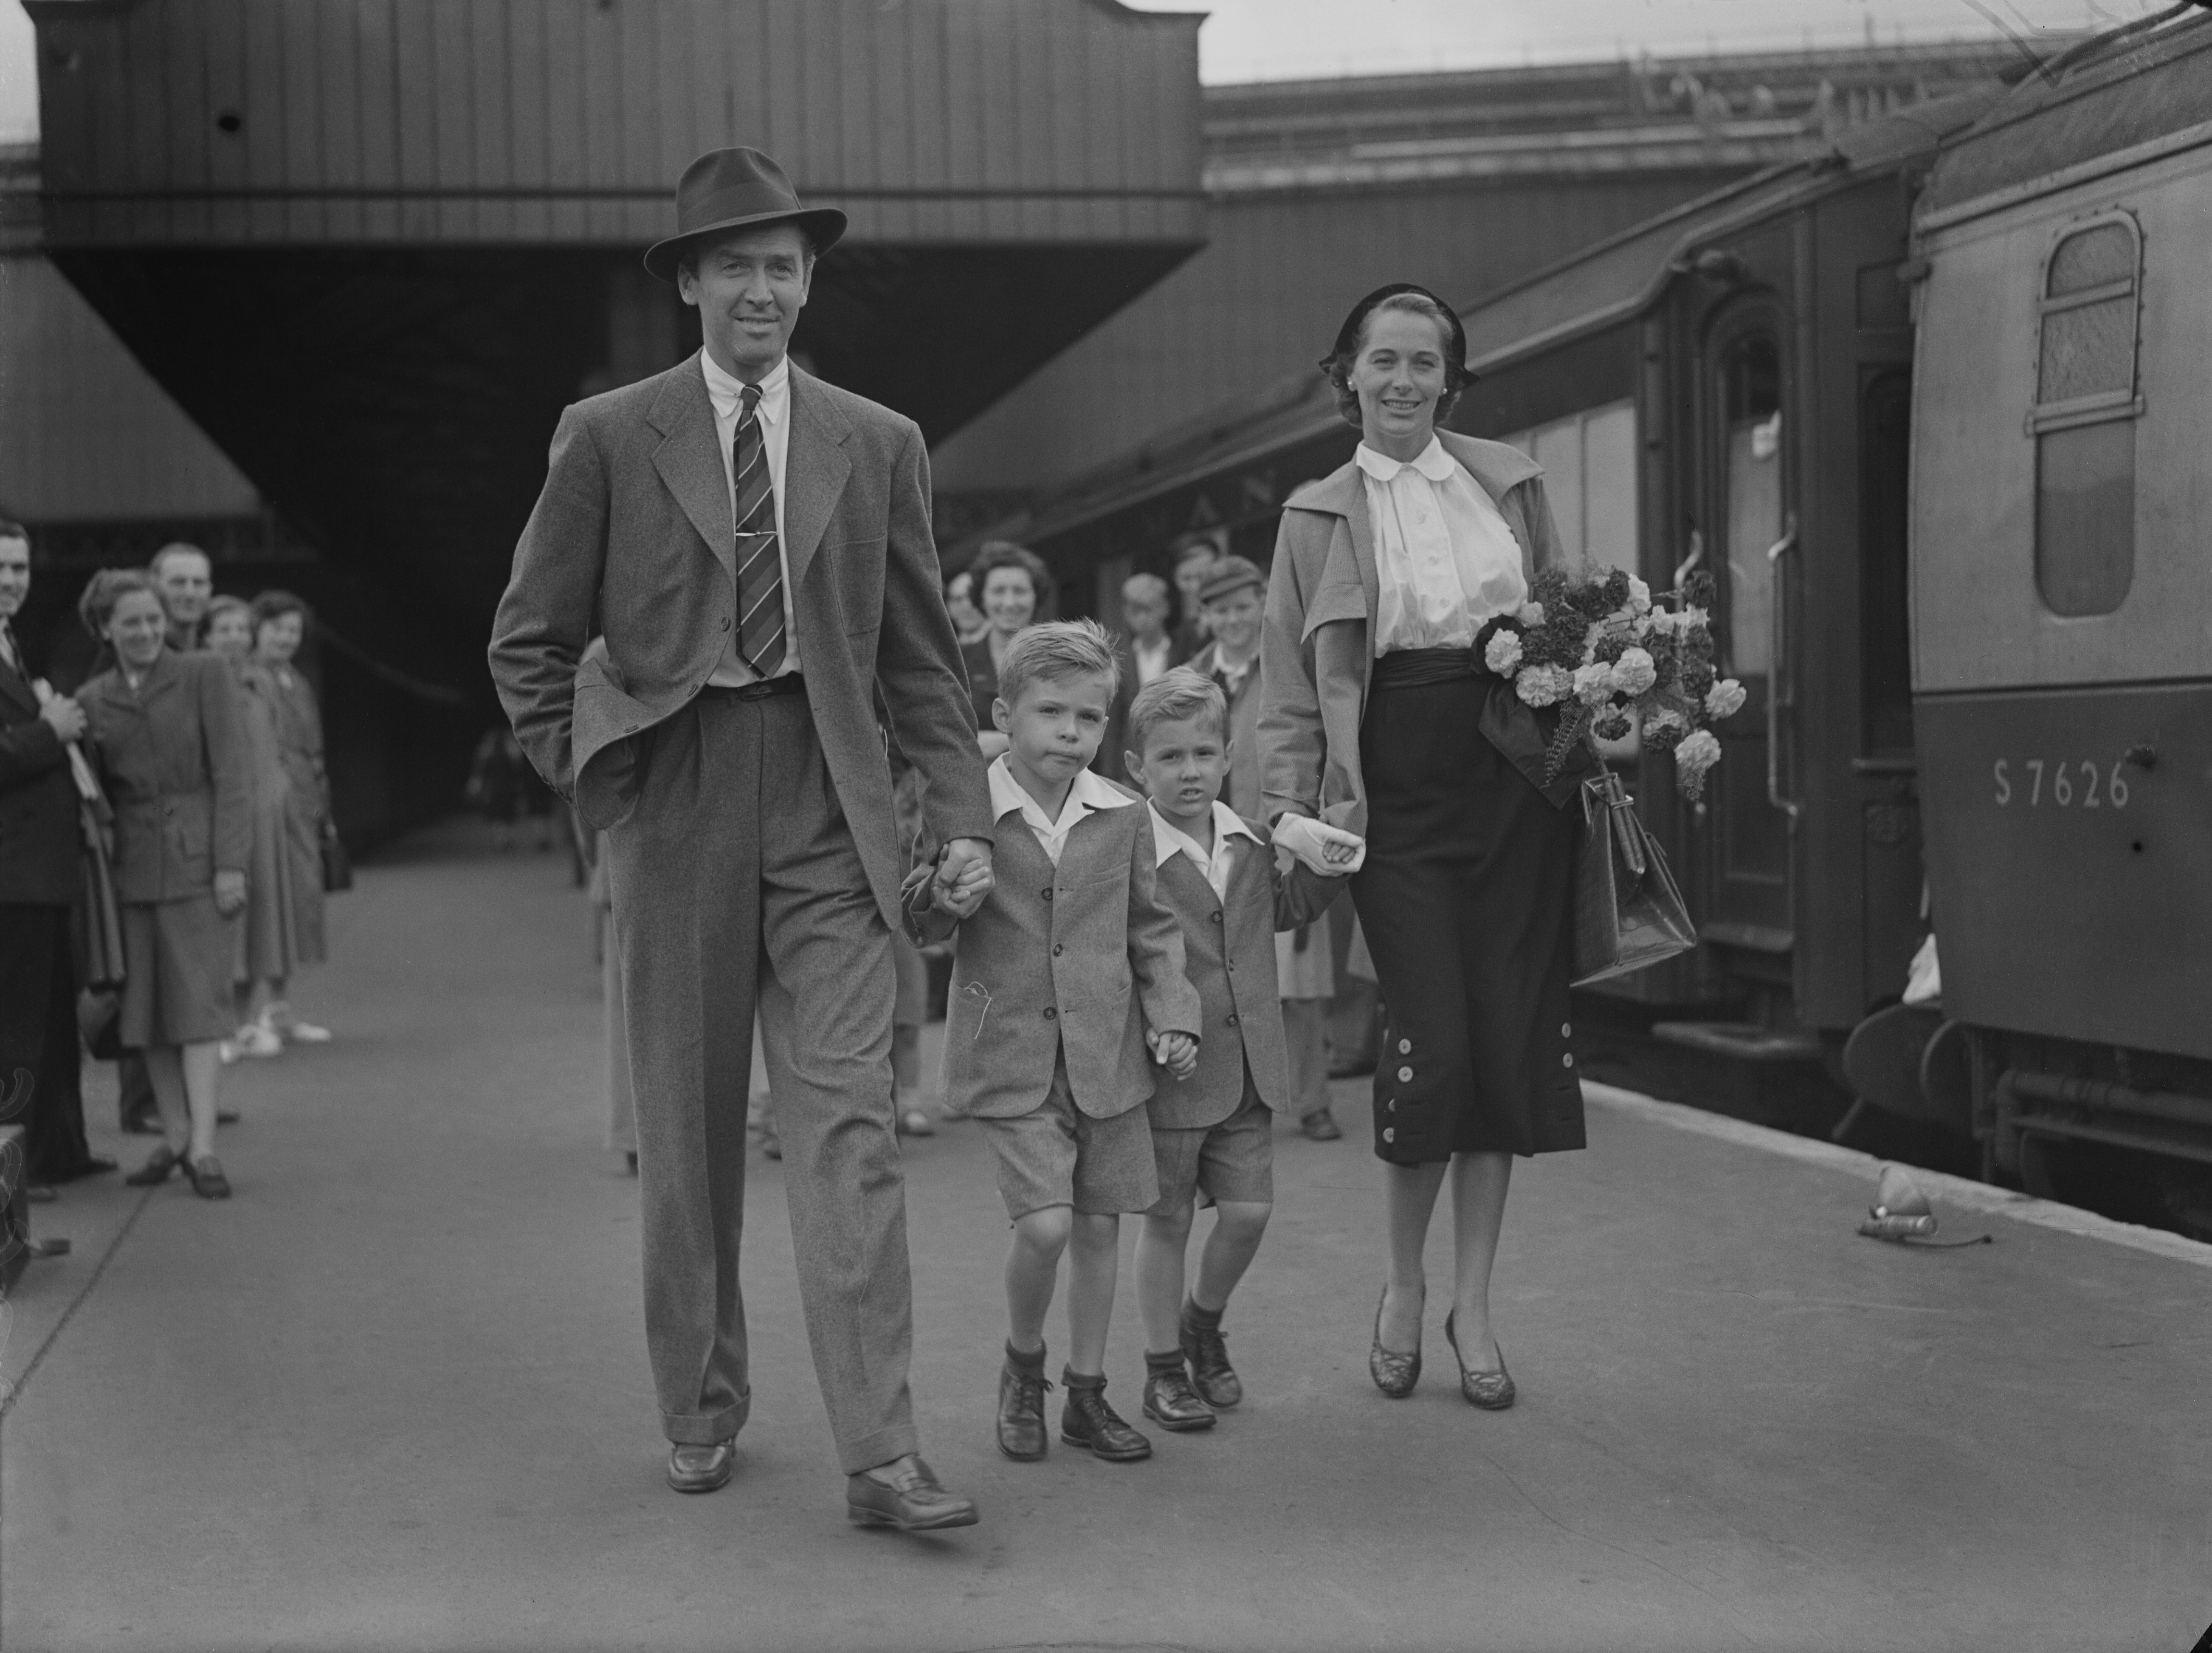 James Stewart and Gloria Hatrick McLean with their sons Ronald and Michael at Waterloo Station in London on August 28, 1950. | Source: Ron Burton/Keystone/Hulton Archive/Getty Images